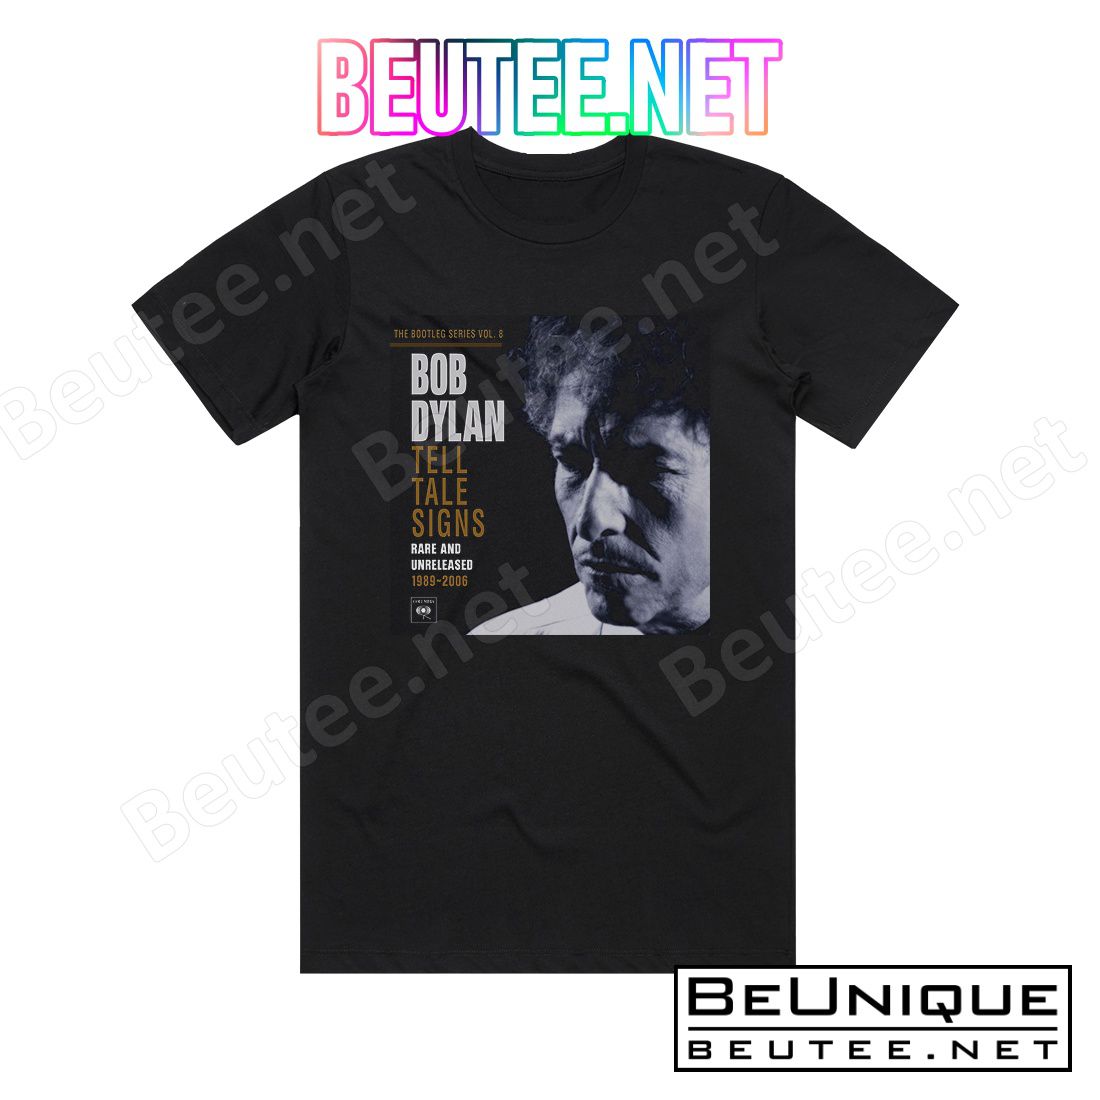 Bob Dylan The Bootleg Series Volume 8 Tell Tale Signs Rare And Unreleased 2 Album Cover T-Shirt